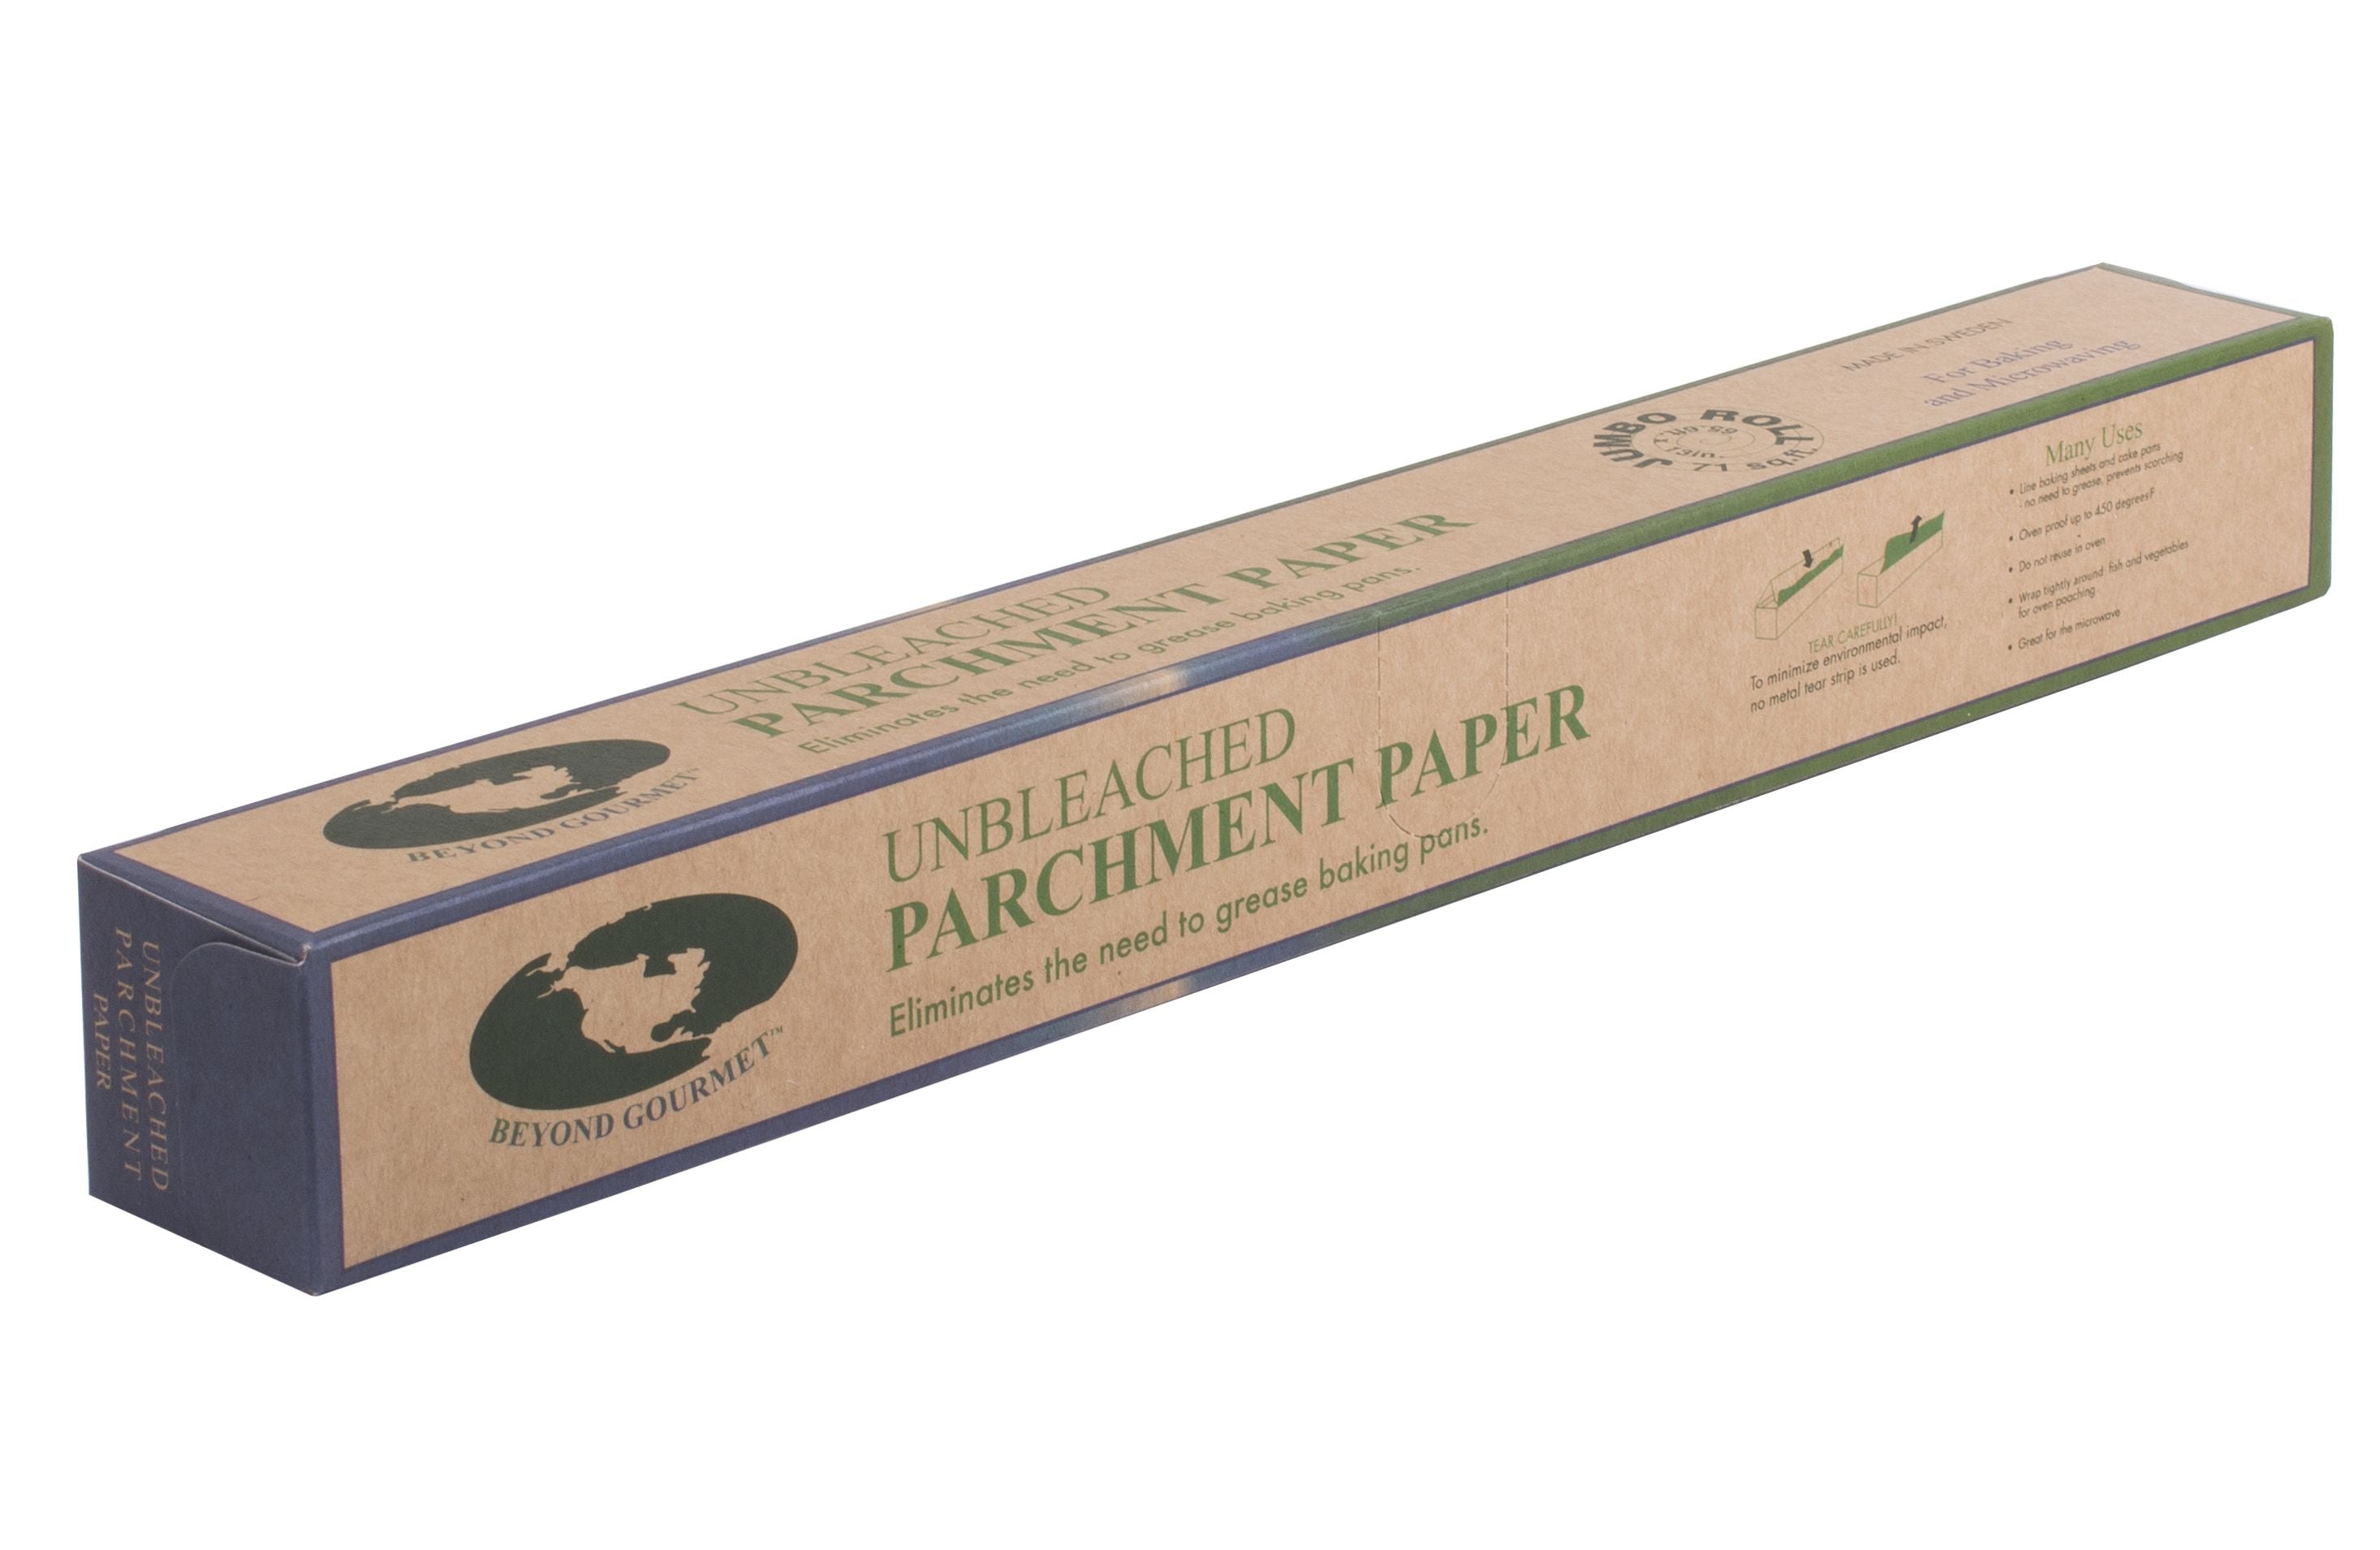 Is It Safe To Use Parchment Paper In The Microwave?